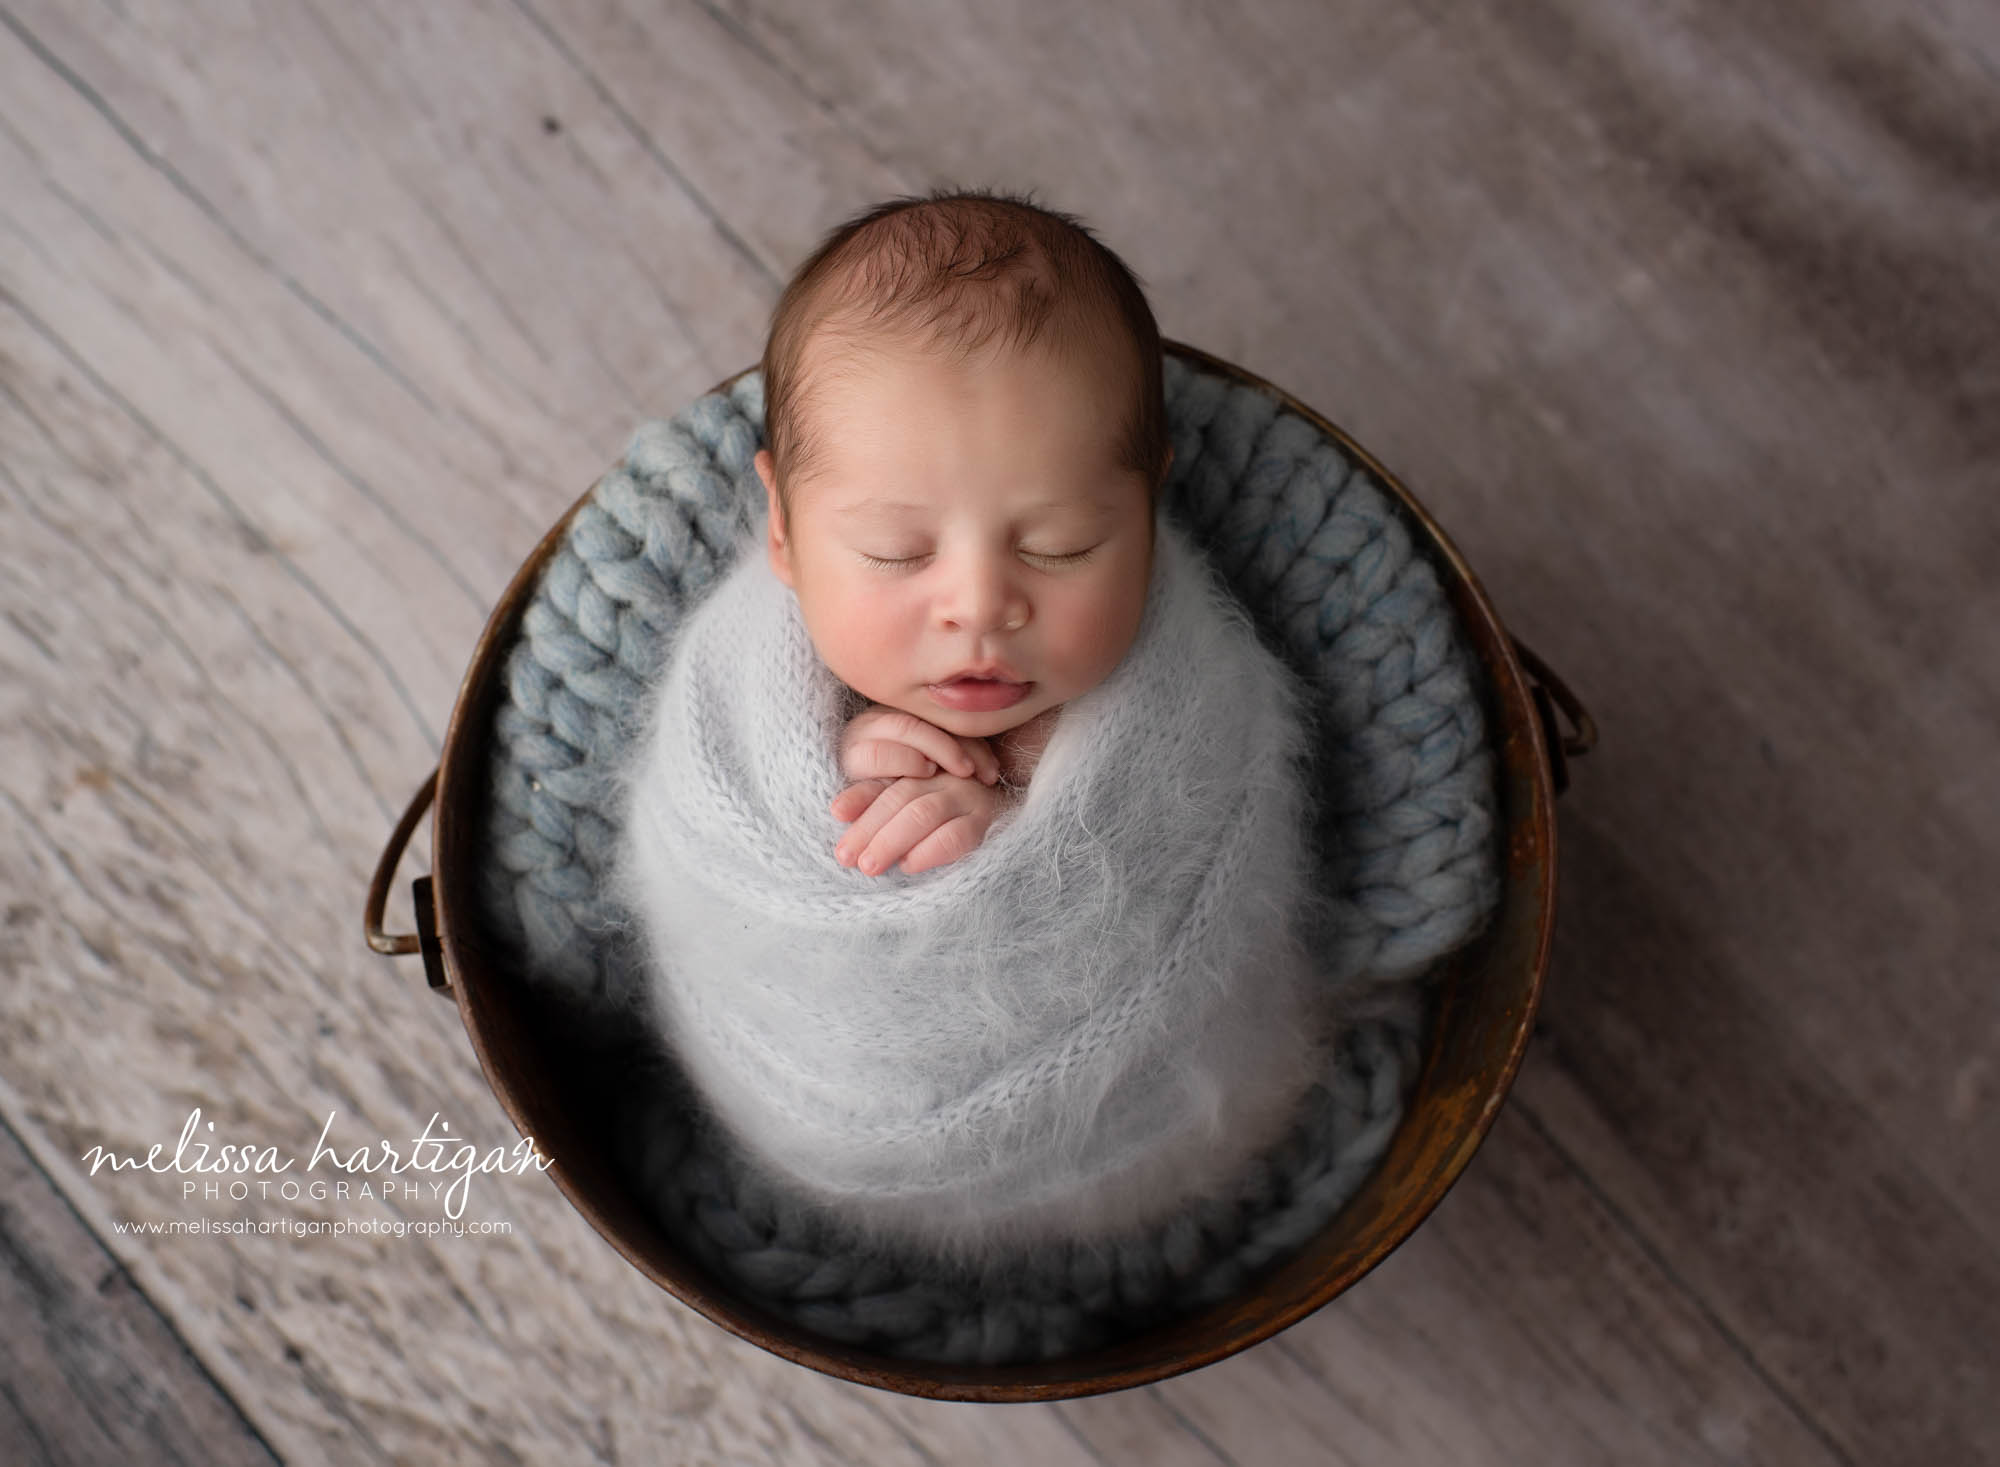 Newborn baby boy swaddled in knitted gray wrap posed in bucket